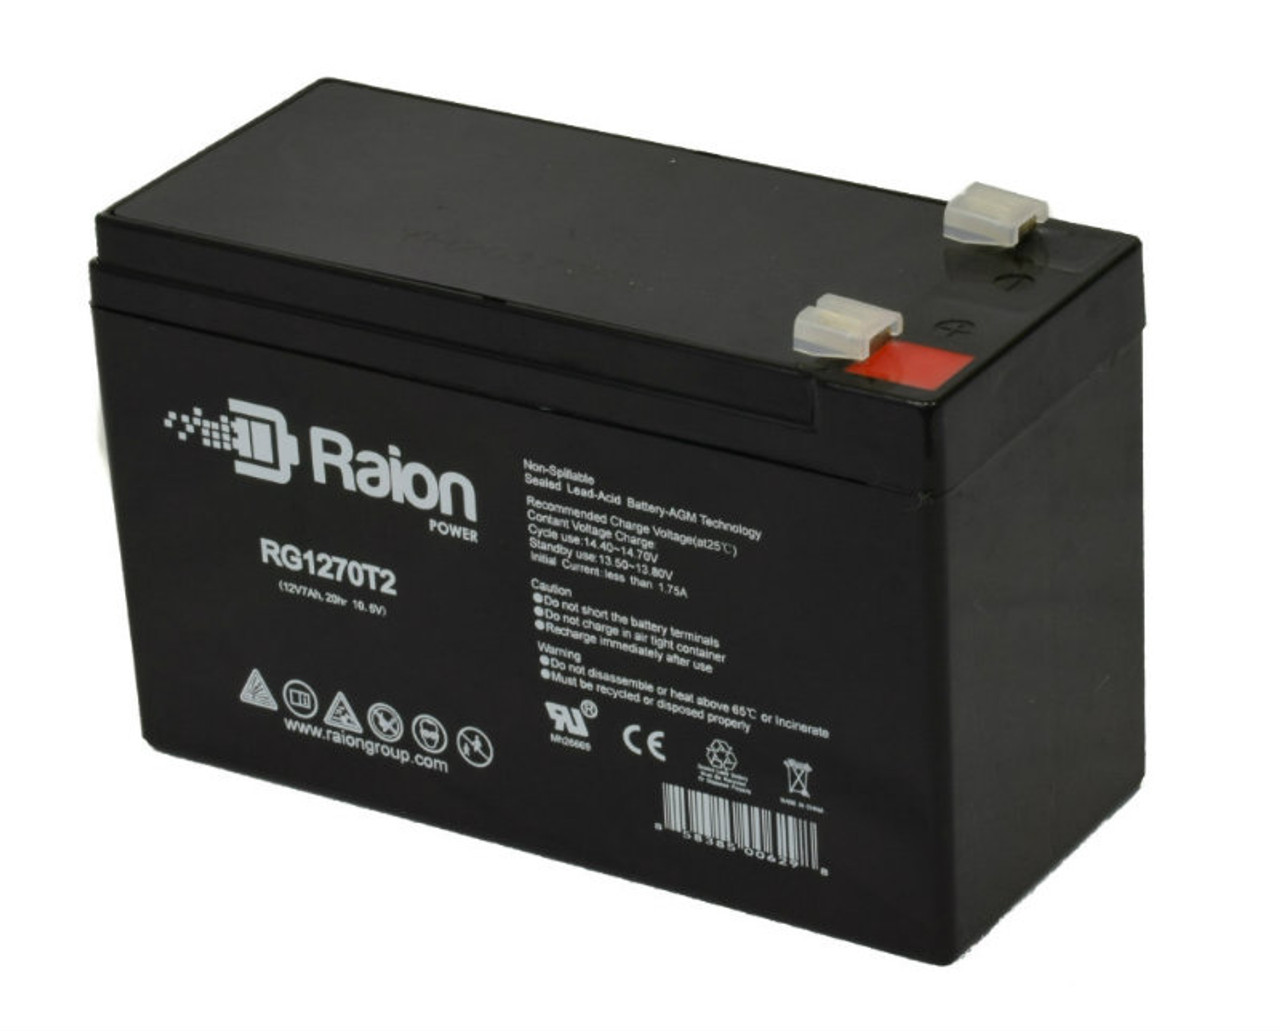 Raion Power Replacement 12V 7Ah RG1270T1 Fire Alarm Battery for Altronix AL600ULX